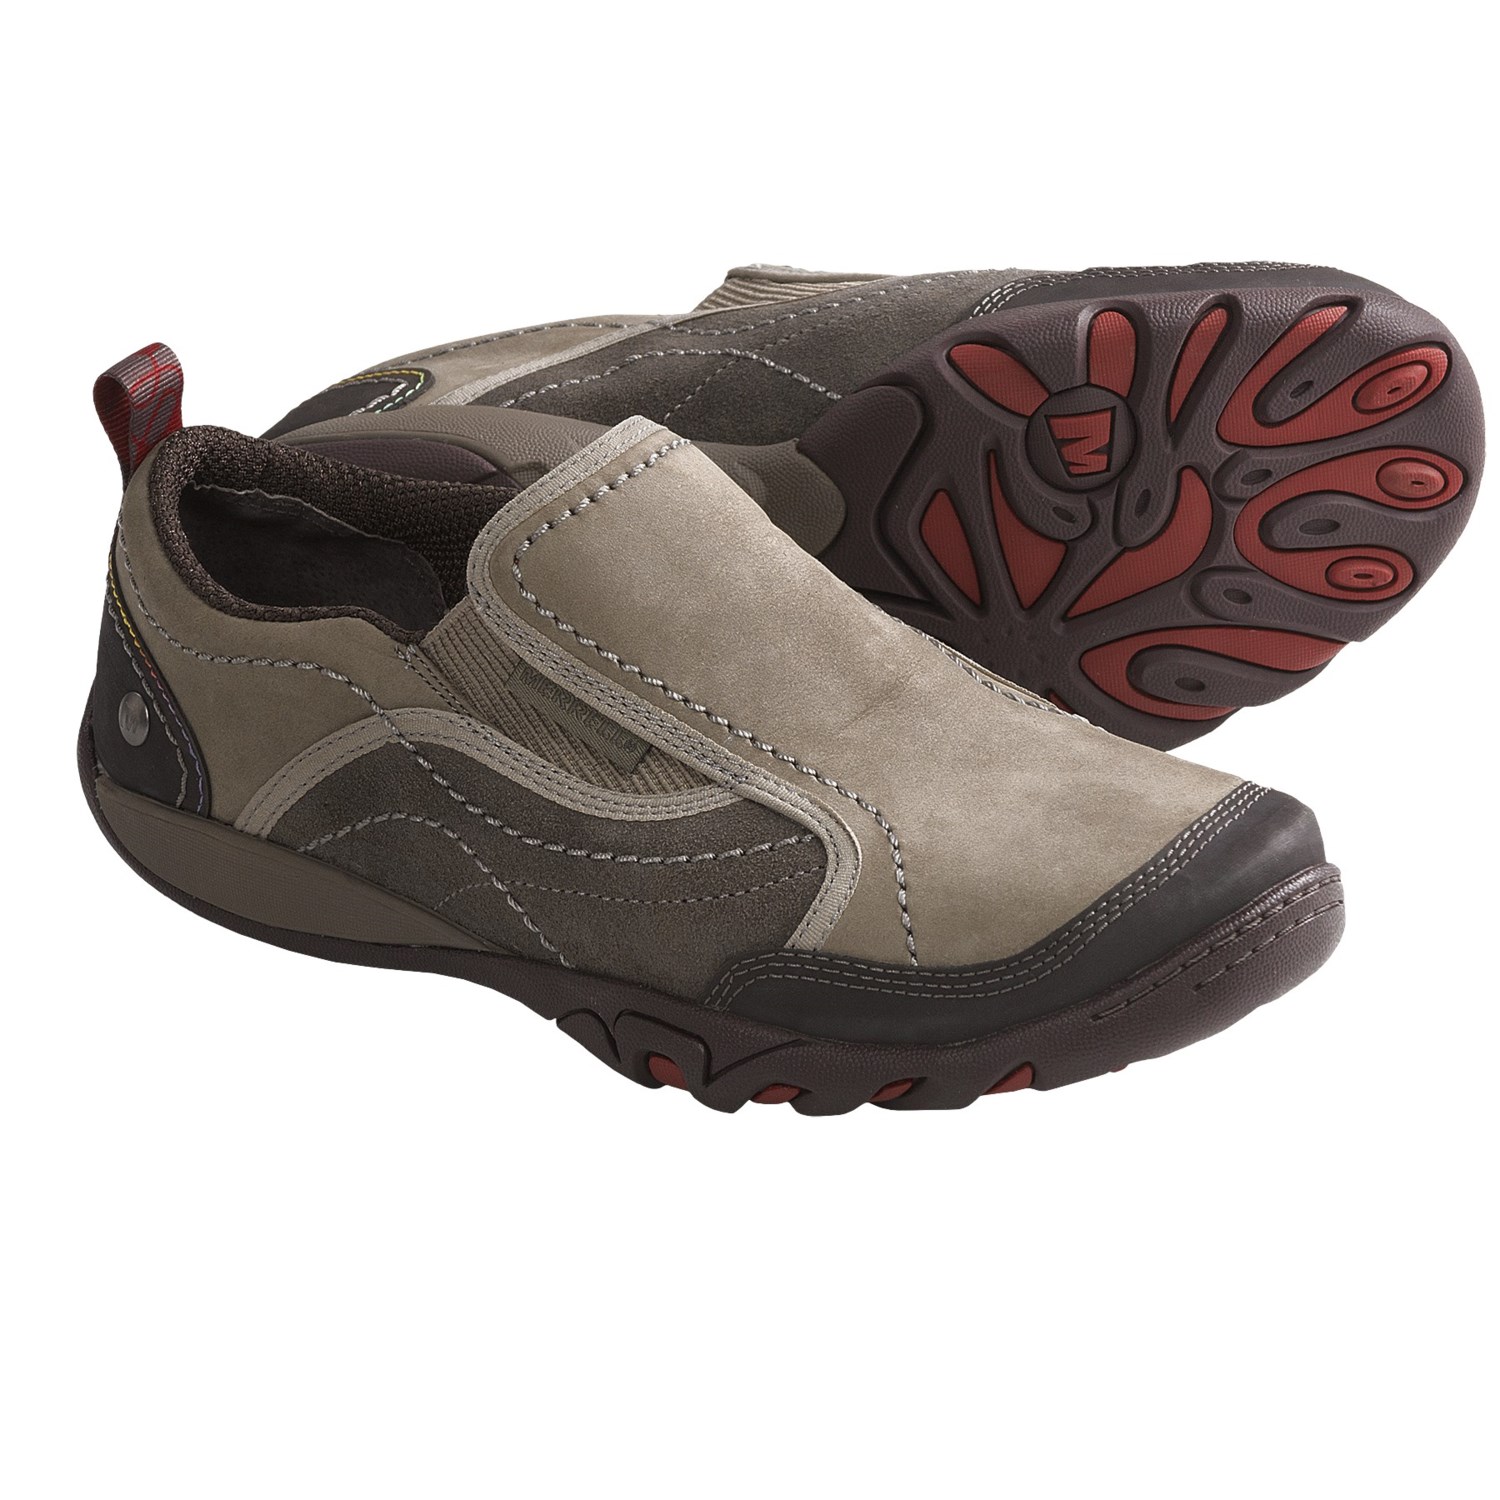 Merrell Mimosa Moc Shoes (For Women) 6246P - Save 30%